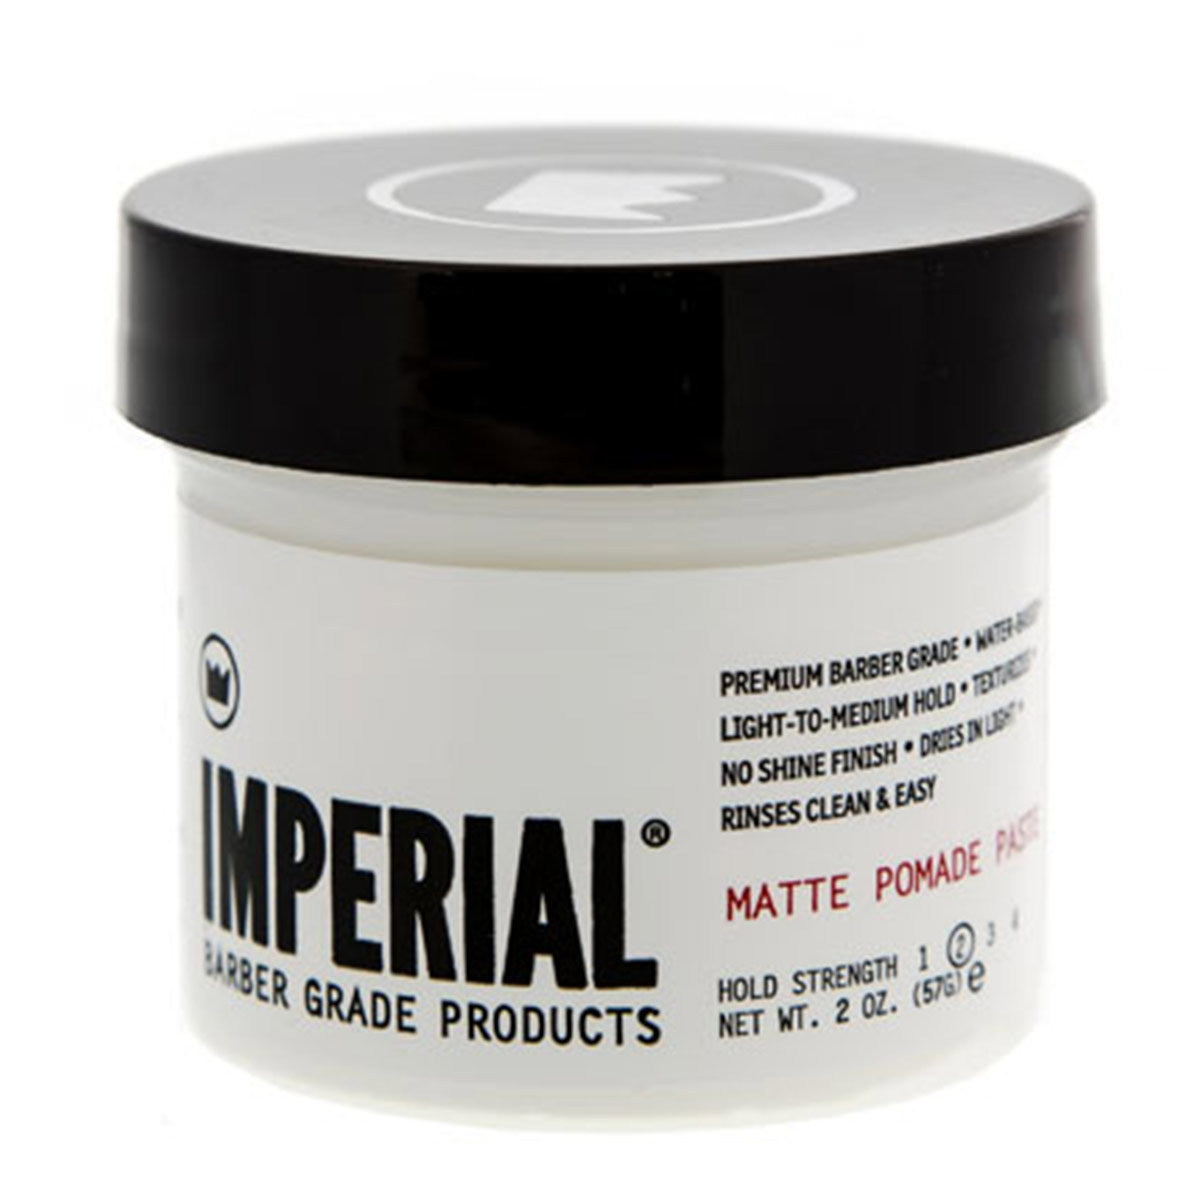 Primary image of Travel Size Matte Pomade